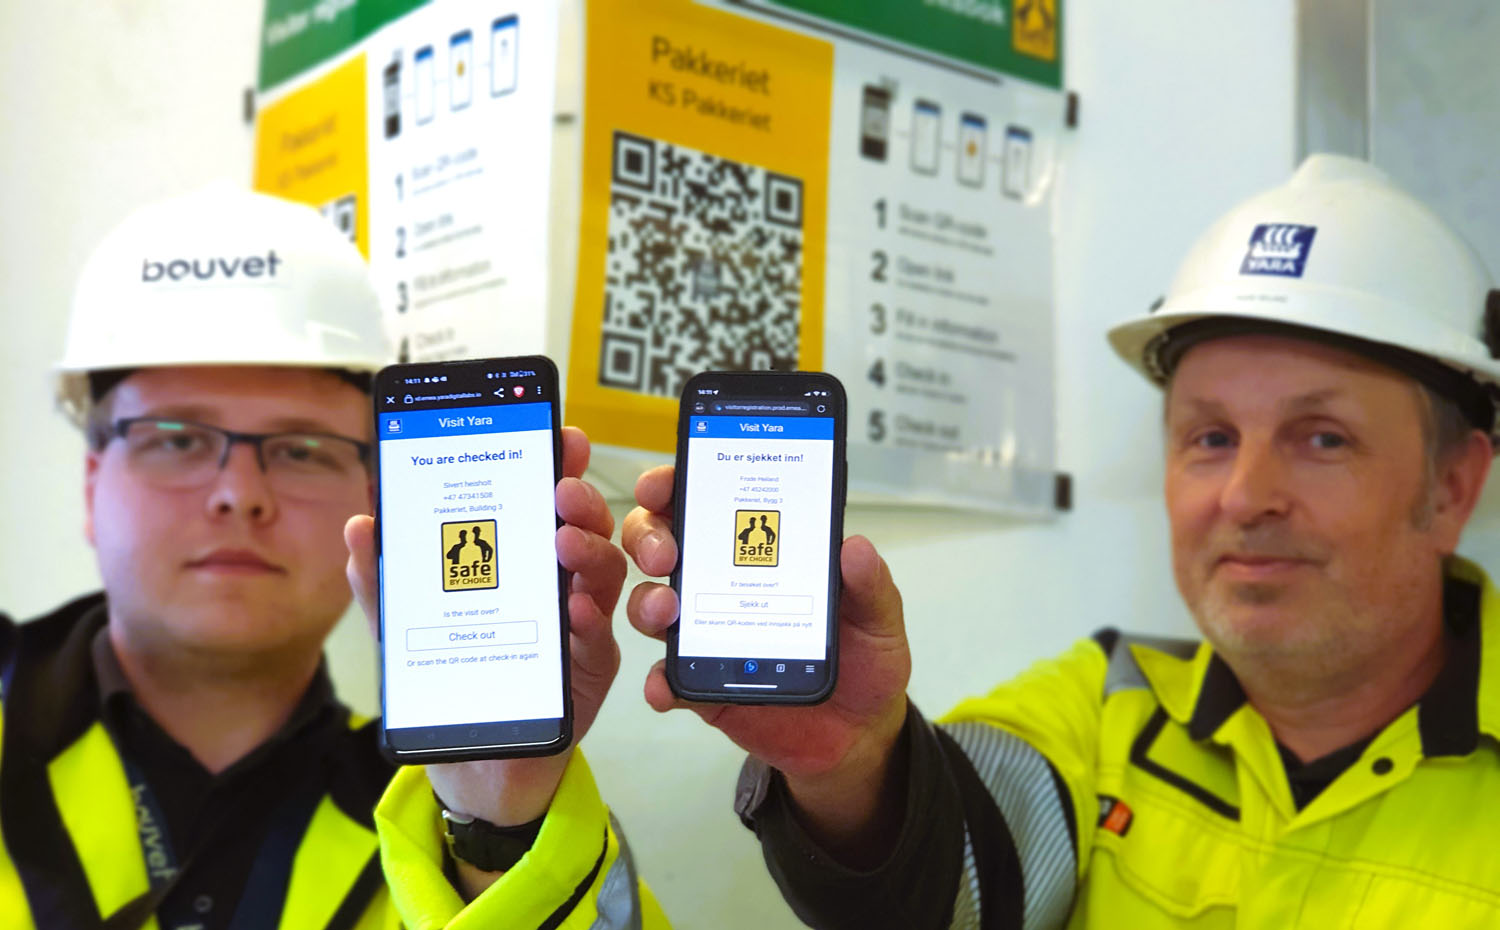 two men hold out their mobiles and show the visitor app. They wear yellow jackets and white helmets, office environment, user manual for app displayed on the wall behind.